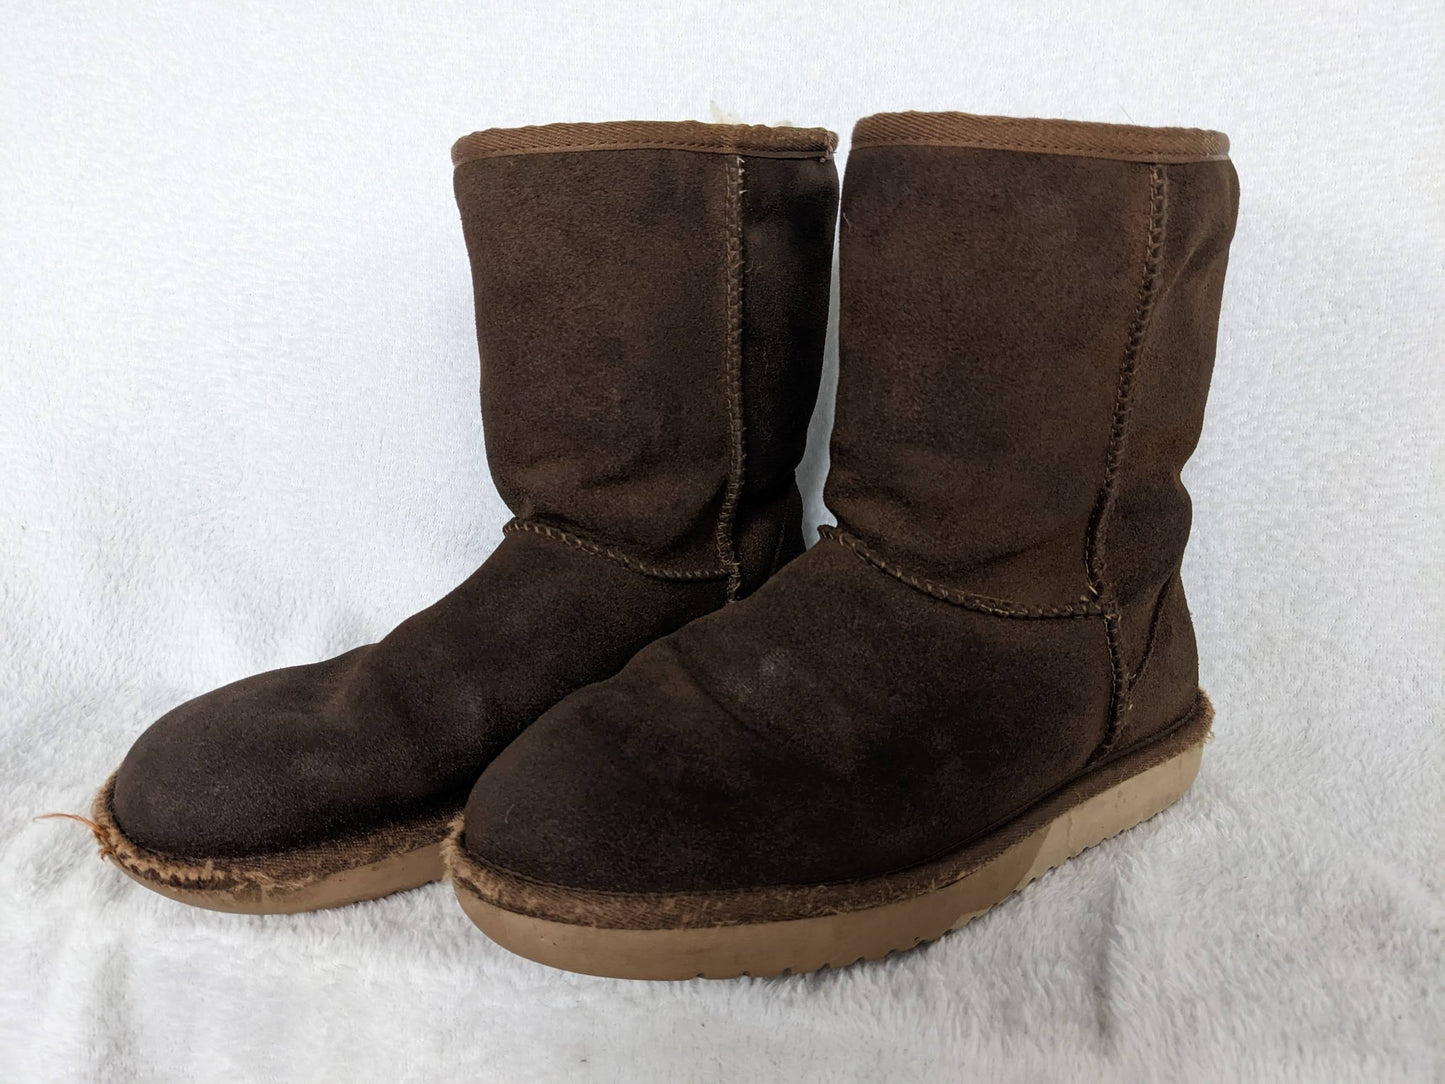 Ugg Koolaburra Fleece Lined Snow Boots Size 6 Color Brown Condition Used